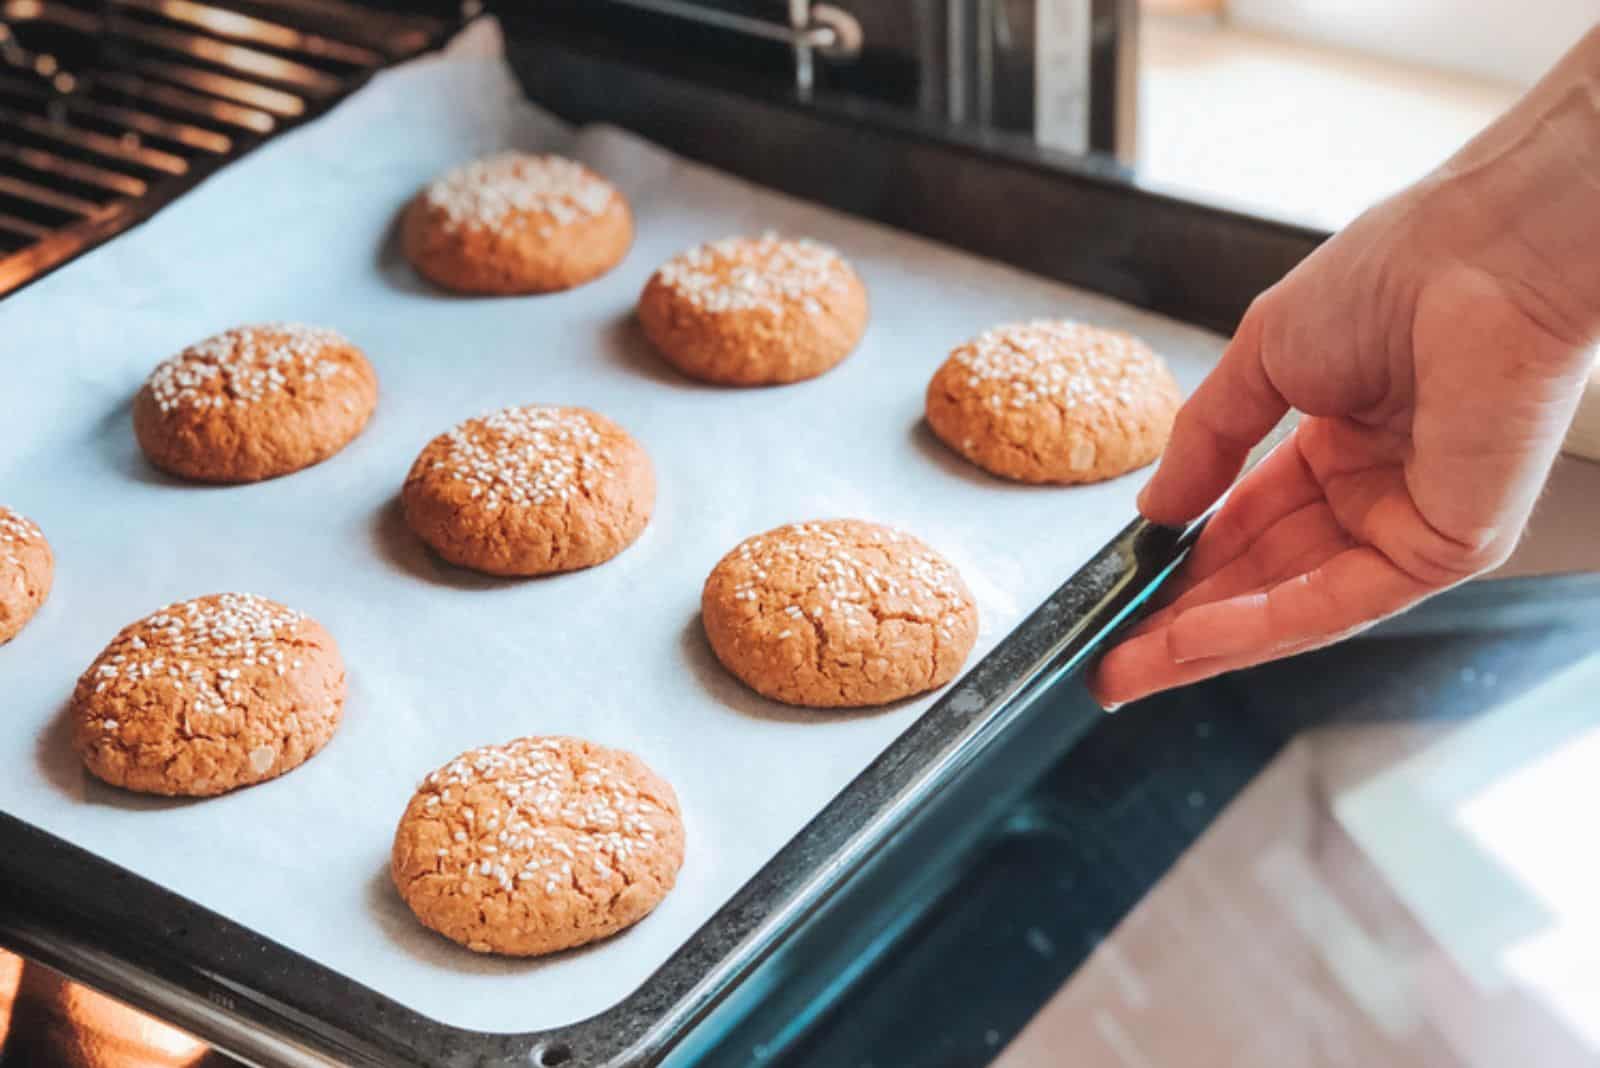 A woman puts in the oven a baking tray with oatmeal cookies